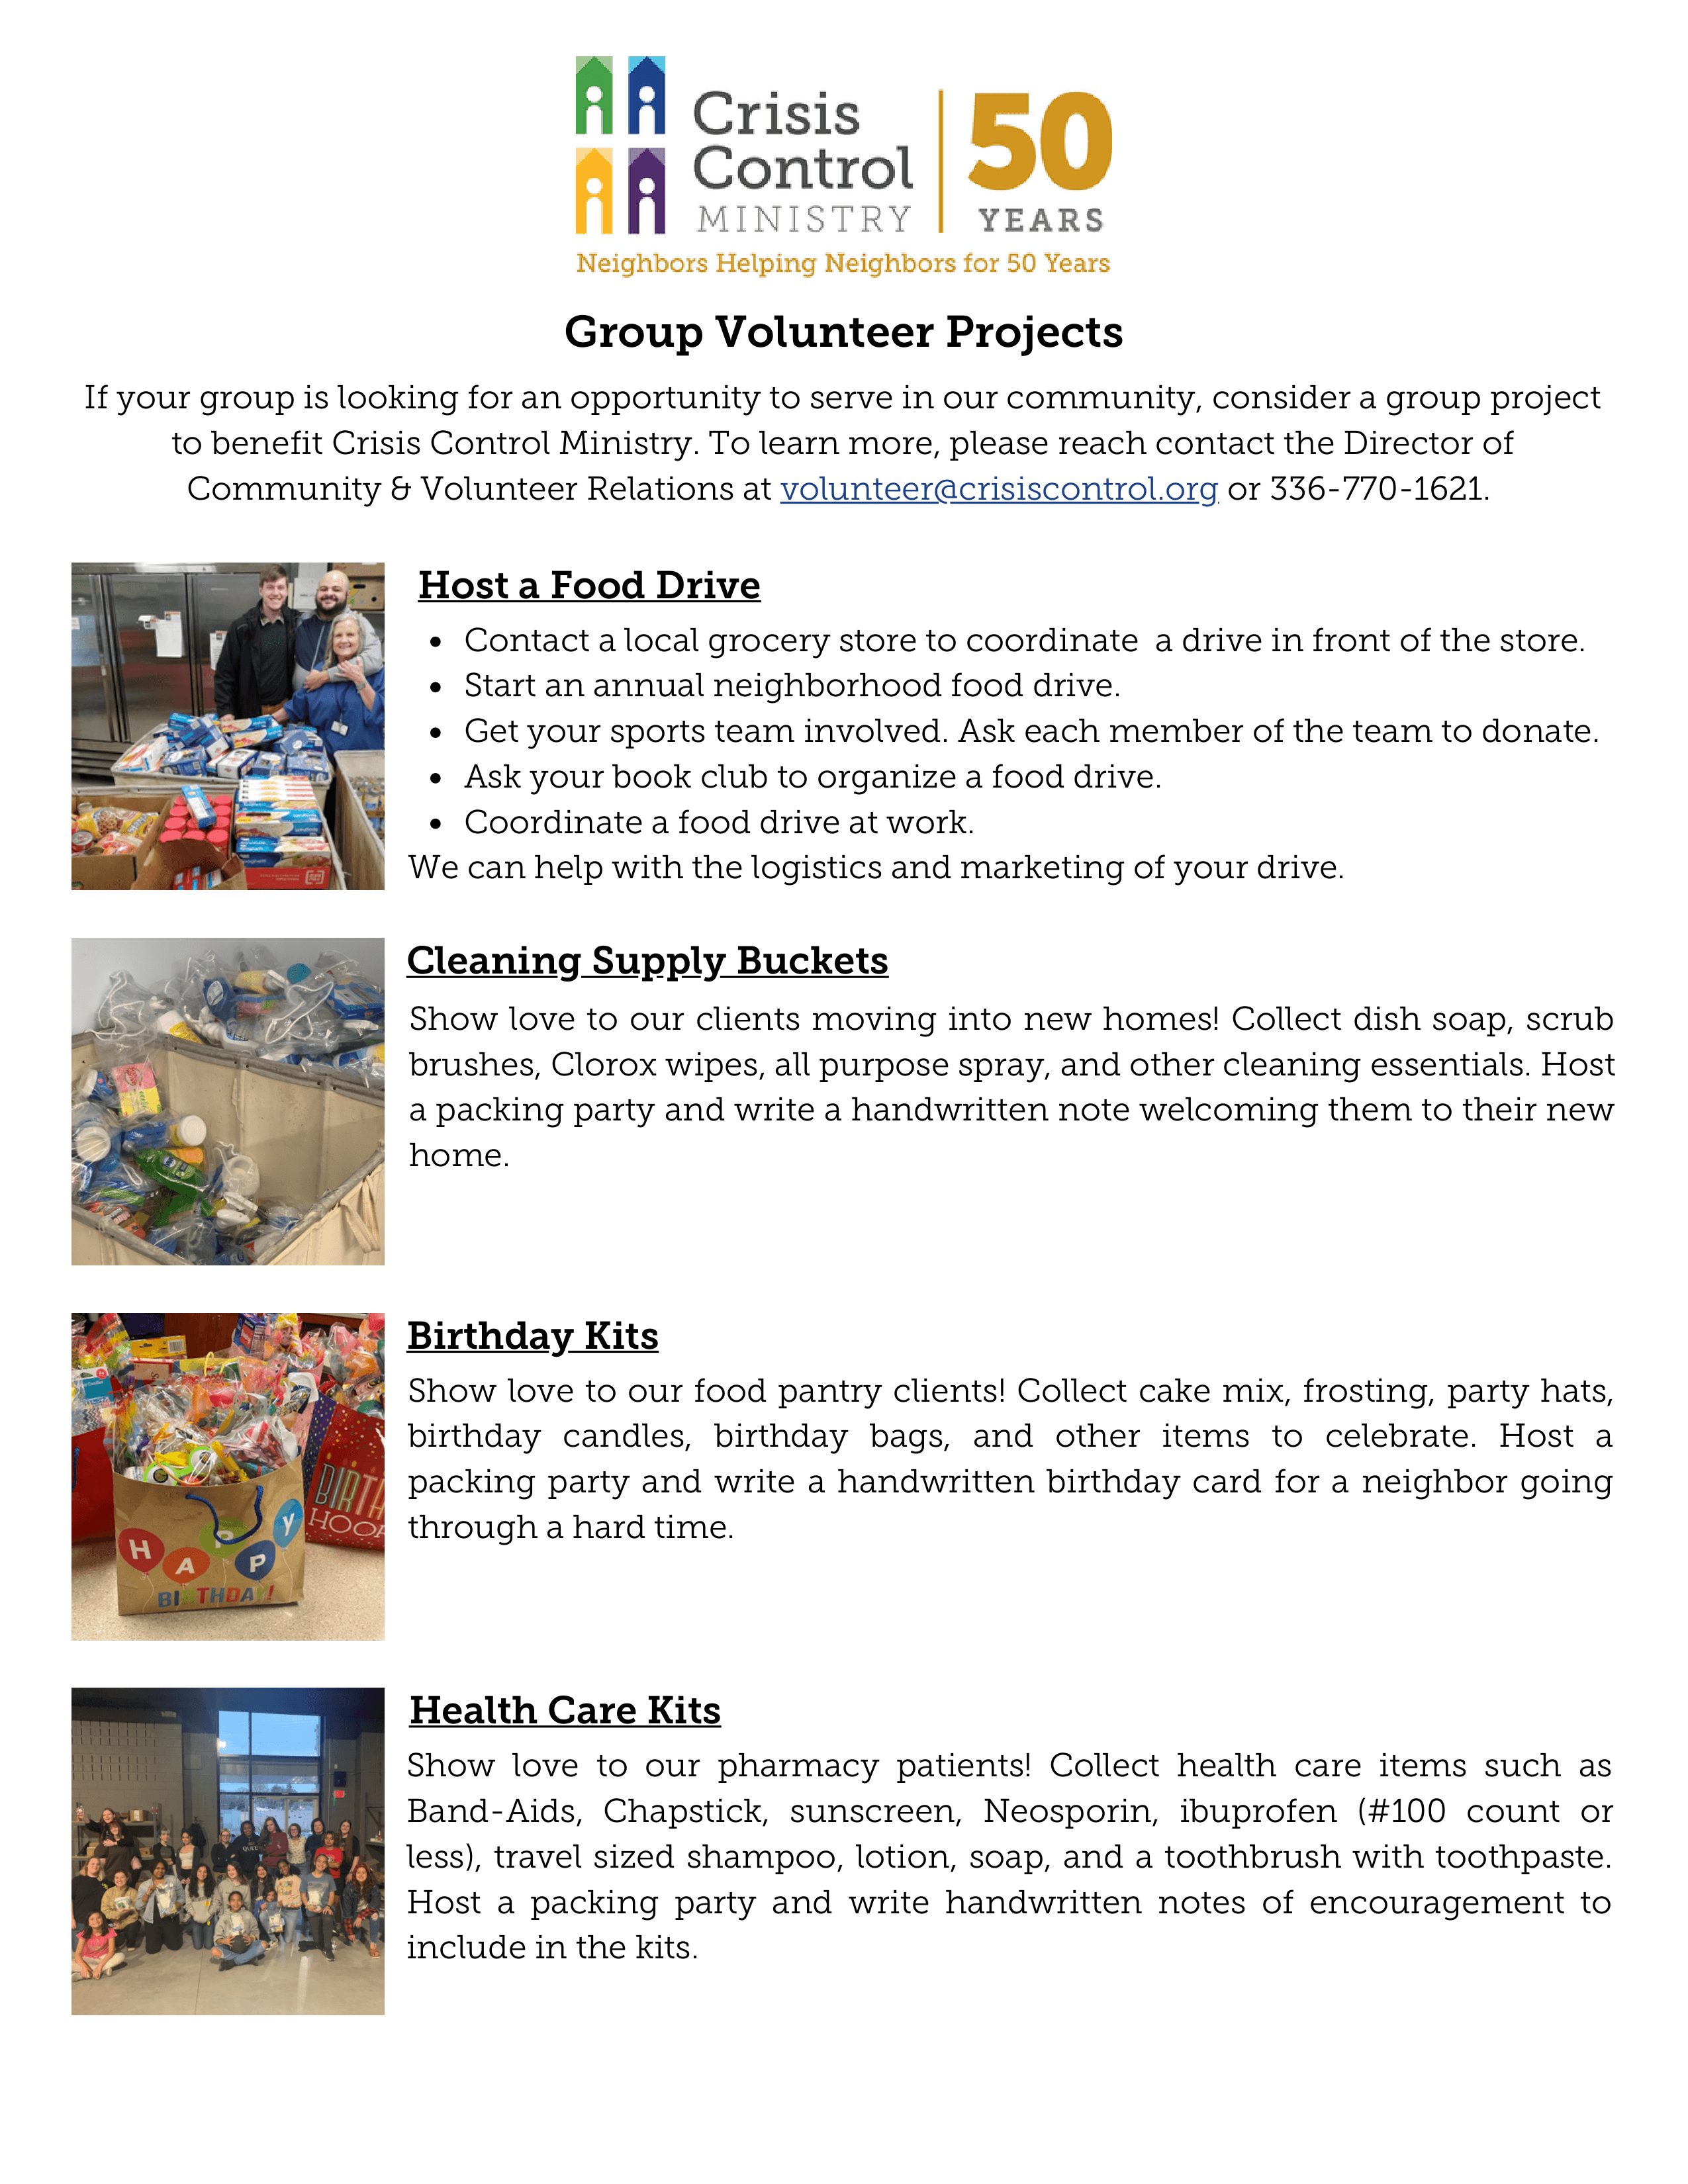 Volunteer Group Projects